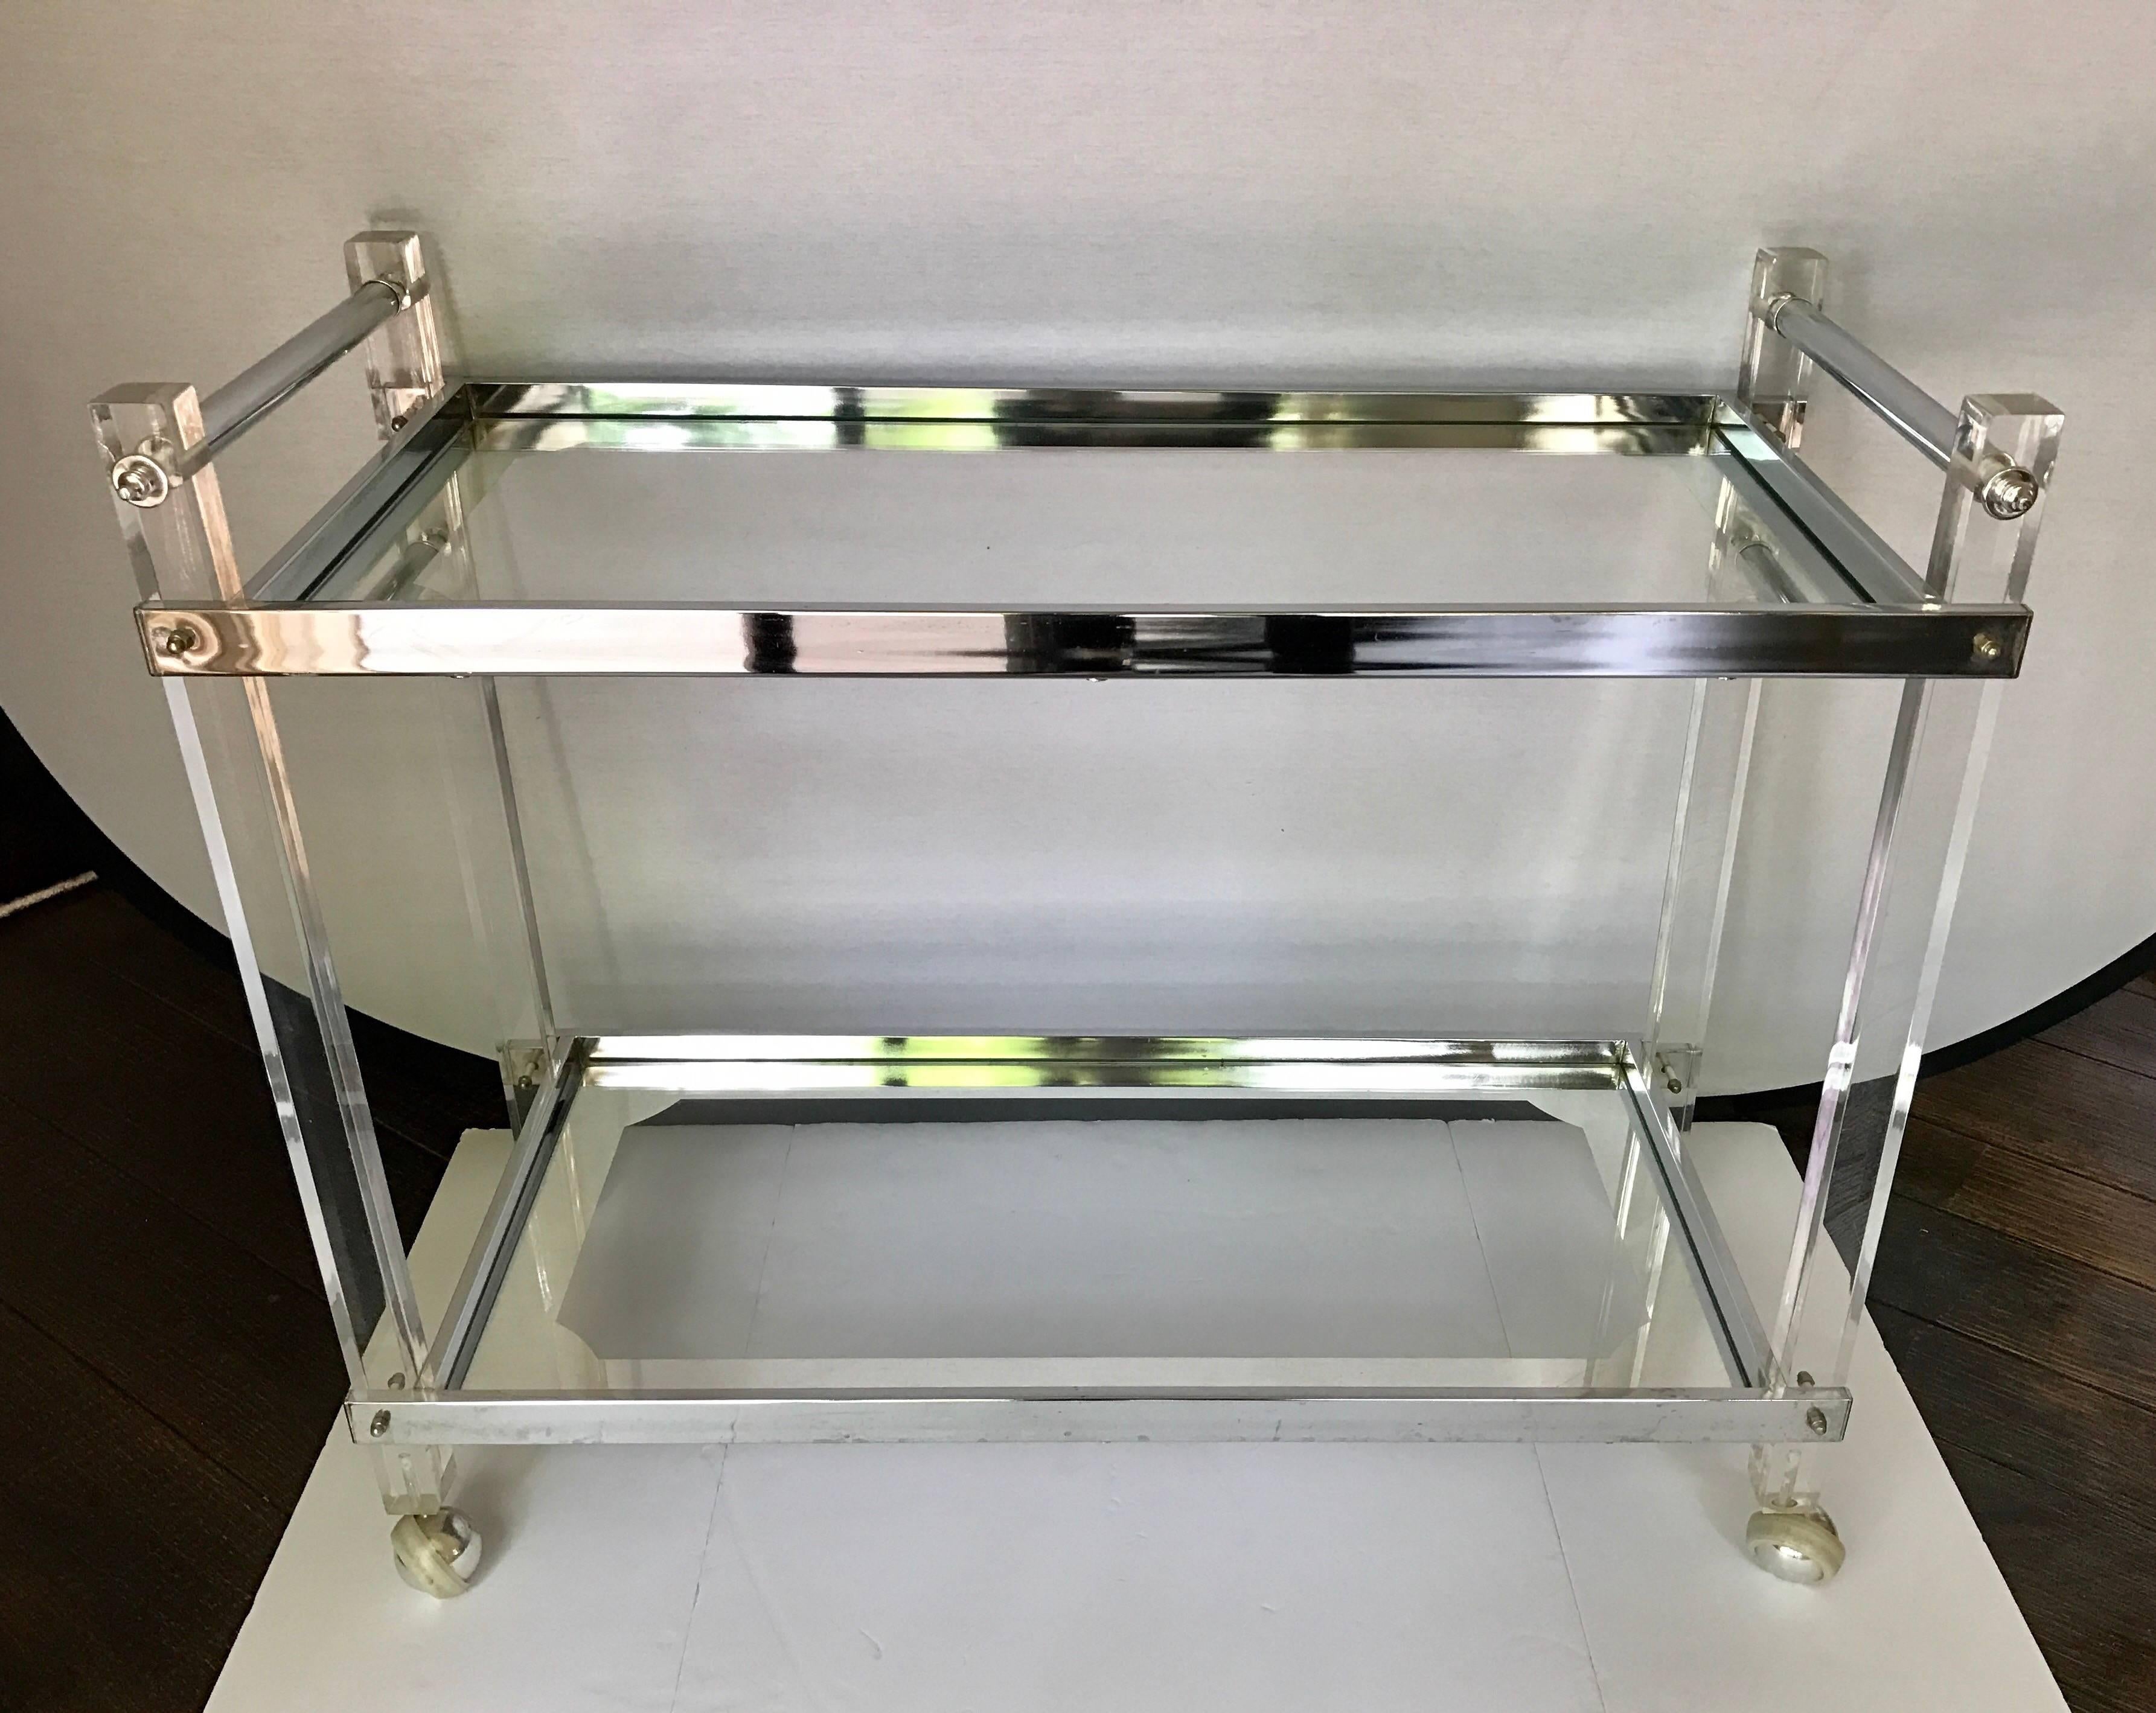 In the style of Charles Hollis Jones, this Italian lucite rolling bar cart will not disappoint.
Features glass inserts with etched silver boarders as well as chrome bracings.